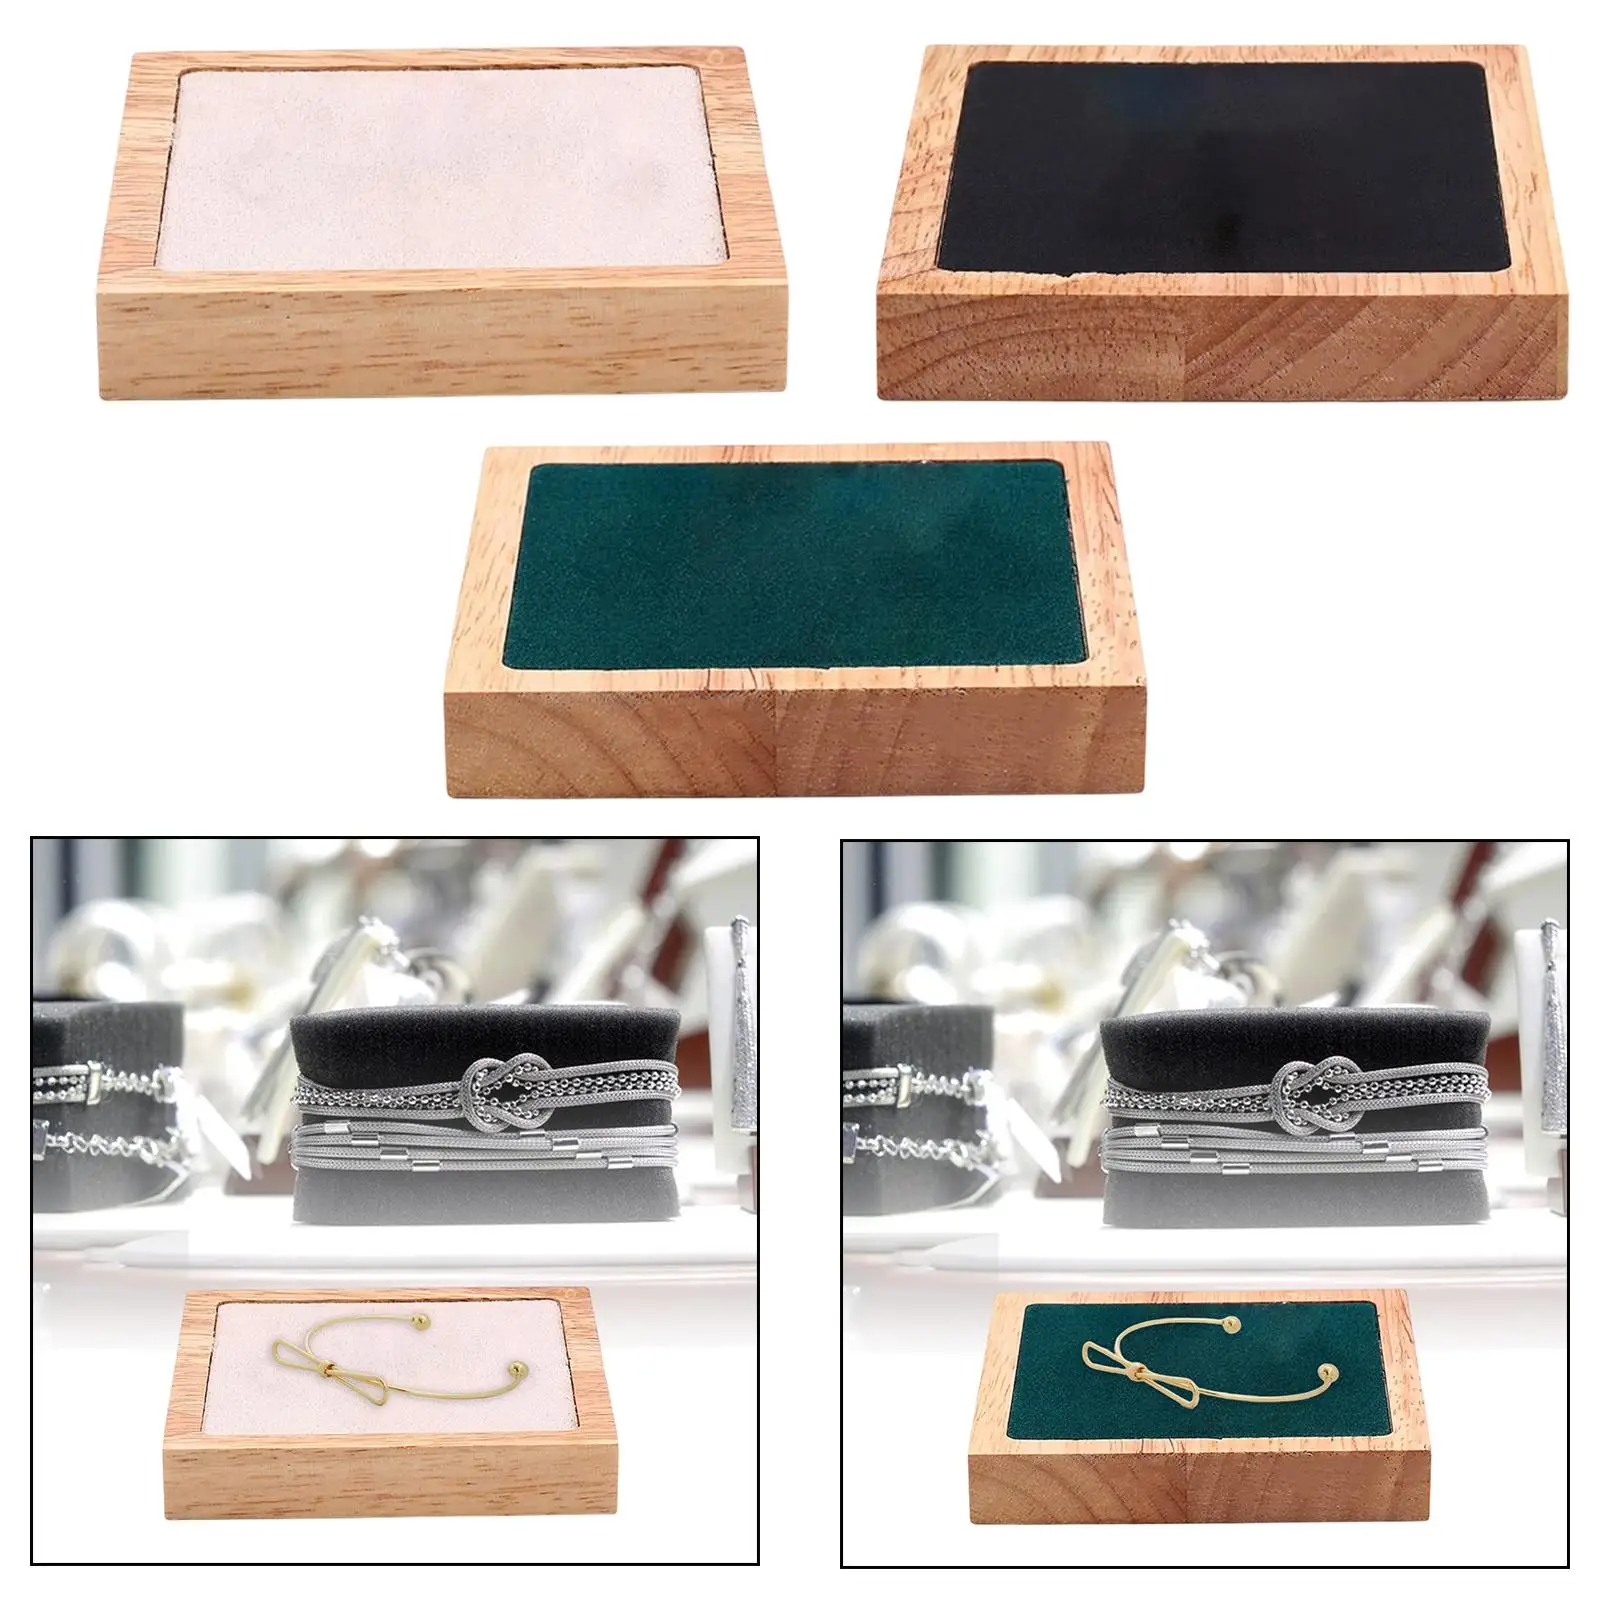 Wooden Velvet Jewelry Tray Organizer Multi-Functional Storage Tray Display Trays for Bracelet Earring Ring Chains Tabletop